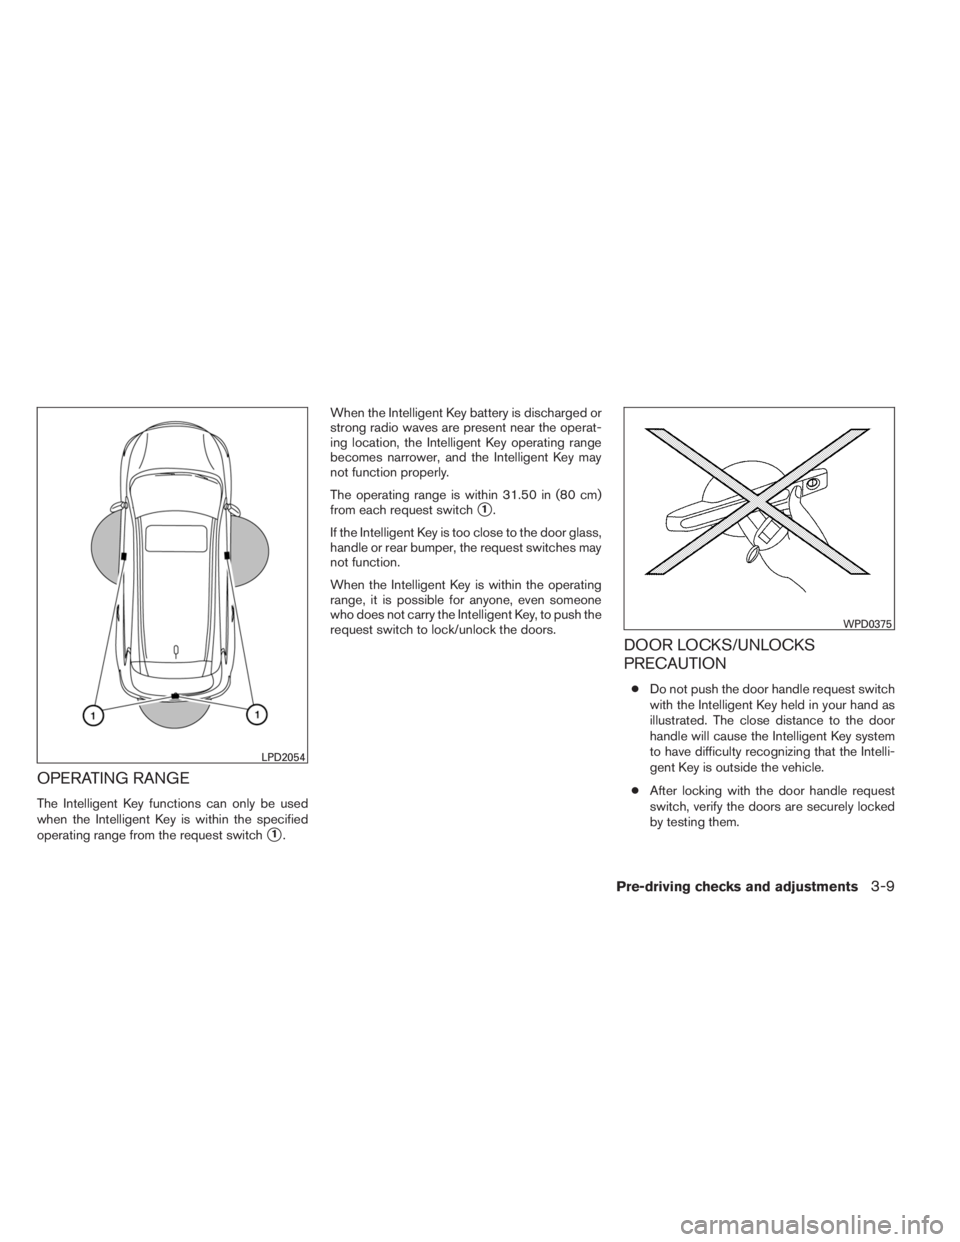 INFINITI QX60 2014  Owners Manual OPERATING RANGE
The Intelligent Key functions can only be used
when the Intelligent Key is within the specified
operating range from the request switch
1.When the Intelligent Key battery is discharge